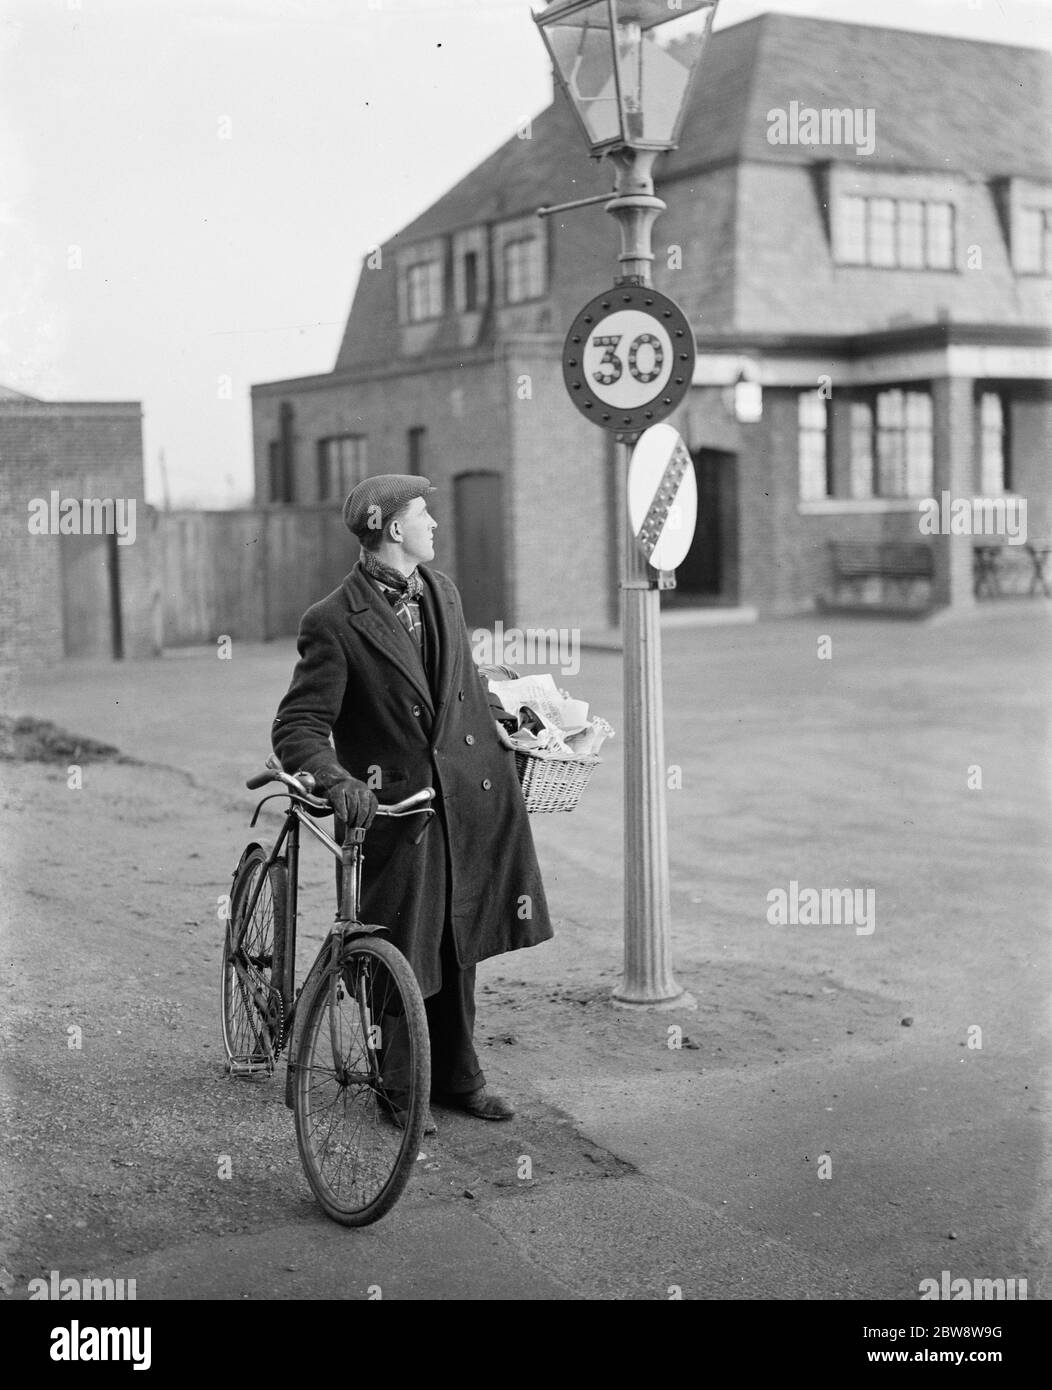 A man looking at a 30 miles per hour speed limit sign in Birchwood , Kent .  1938 Stock Photo - Alamy